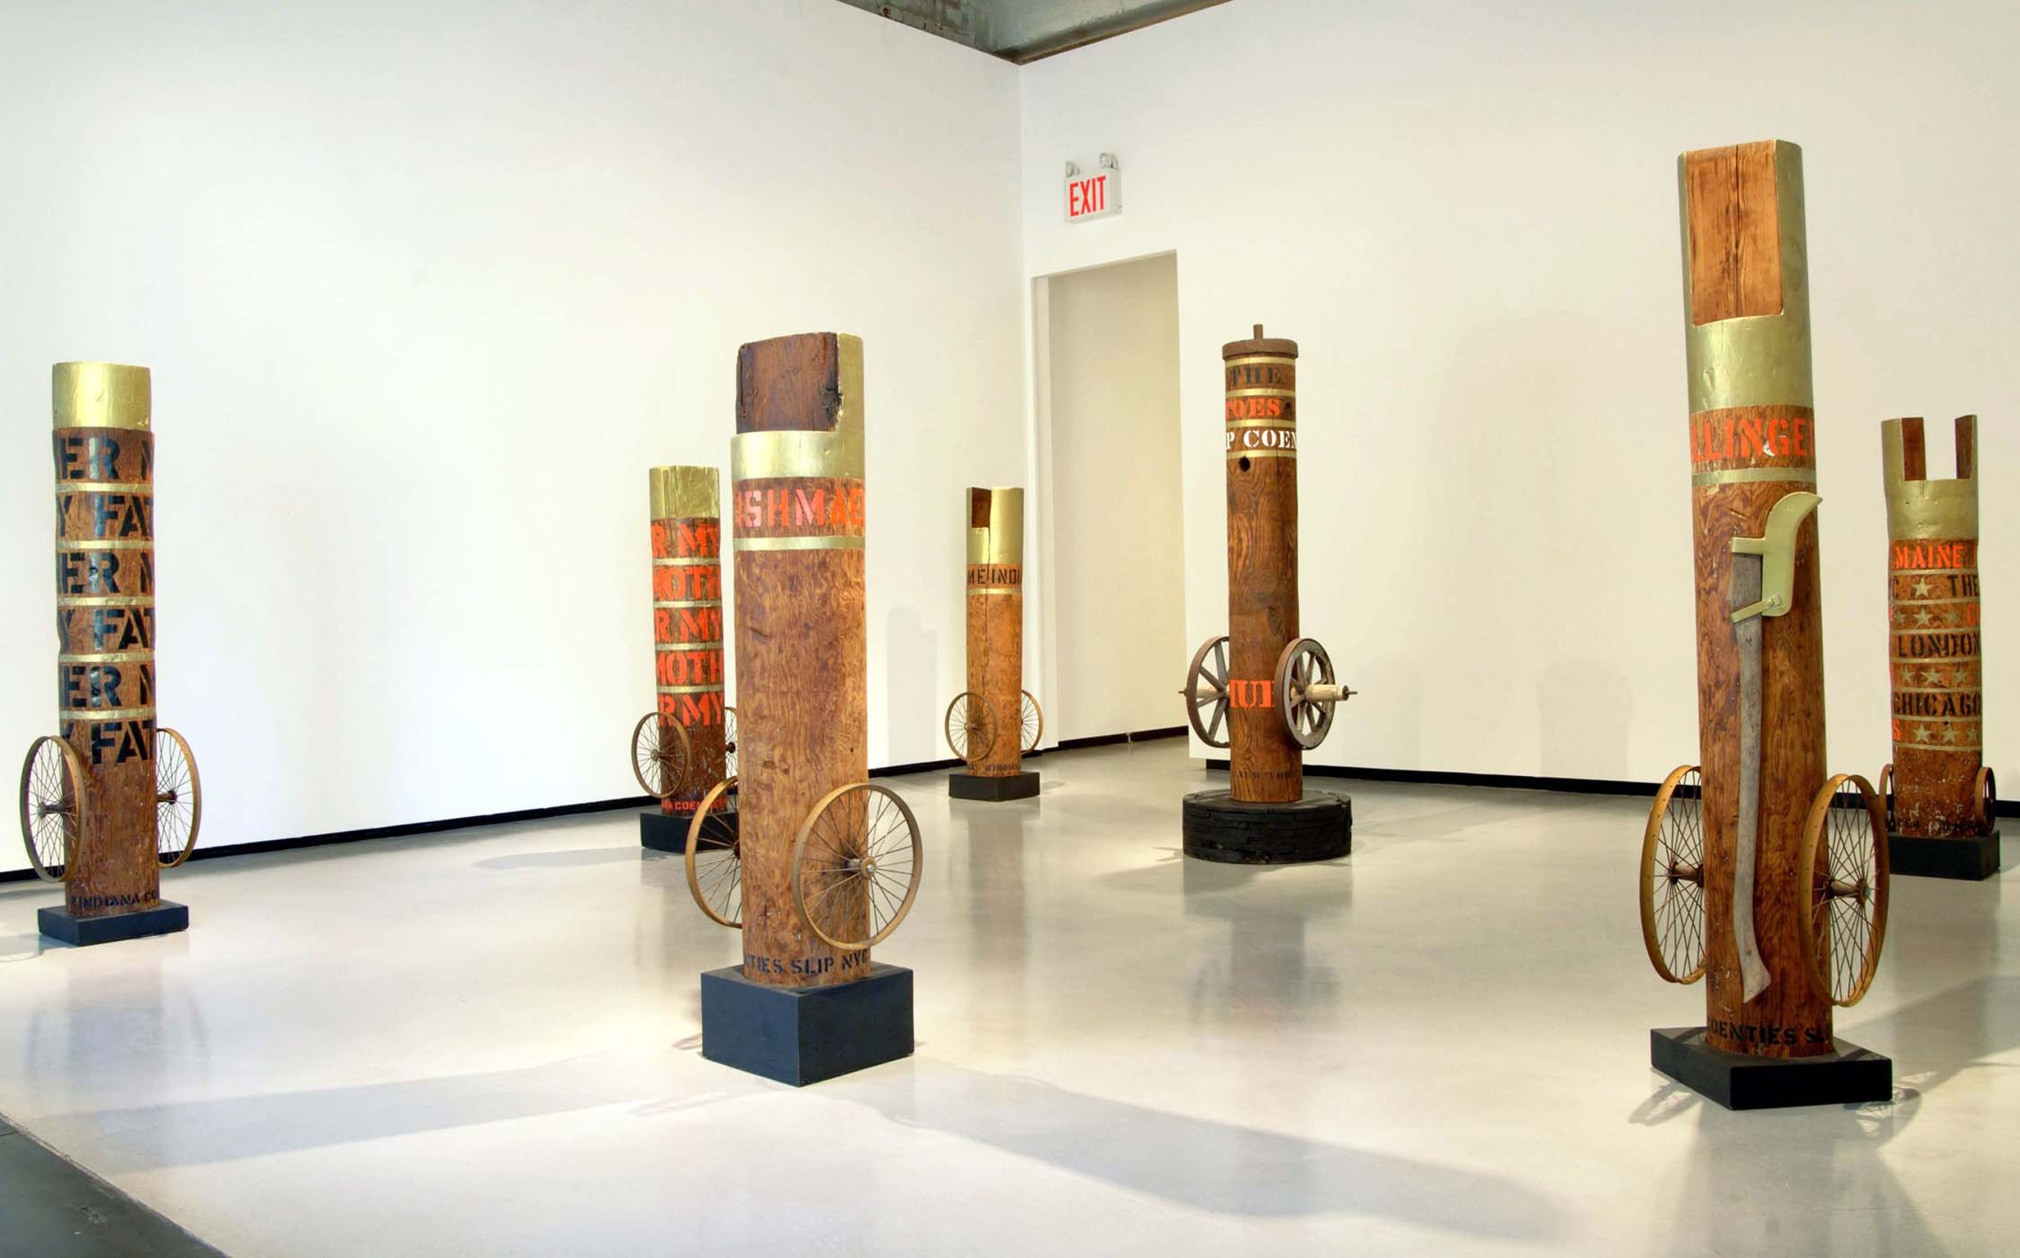 Installation view of&nbsp;Robert Indiana: Wood, Paul Kasmin Gallery, New York,&nbsp;September 9&ndash;October 8, 2005, with Hub (1957/2005) visible third from right